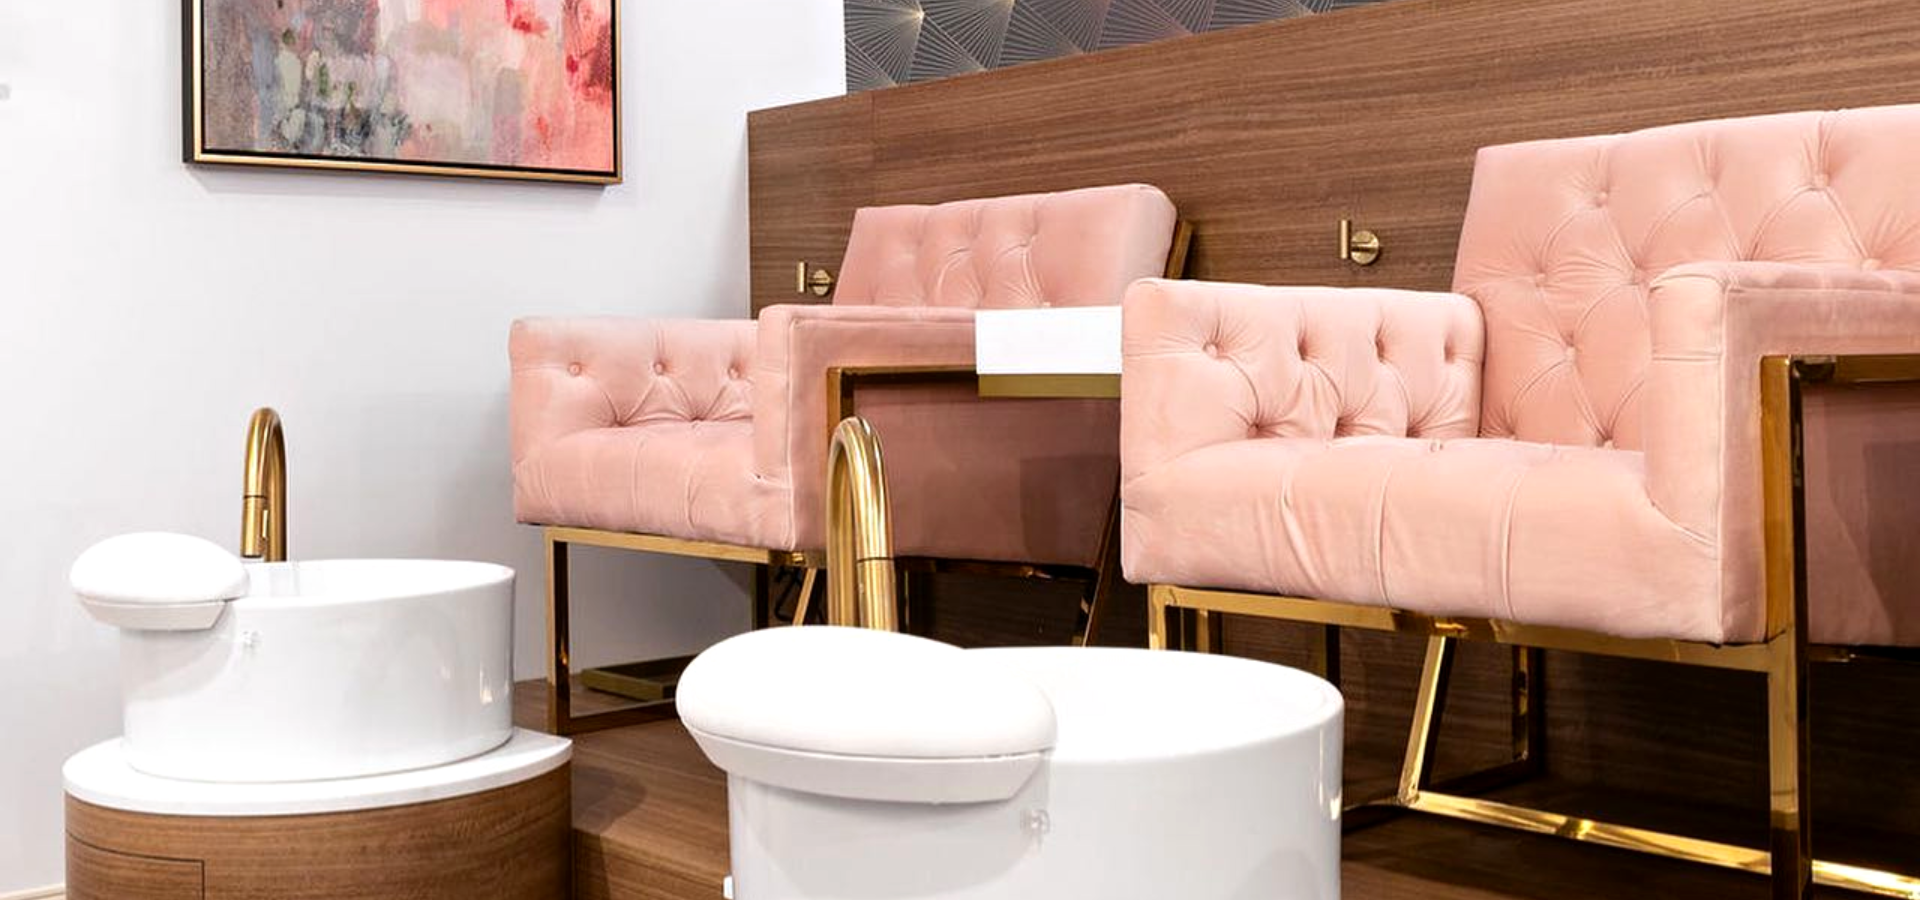 Inside a nail salon with pink chairs.